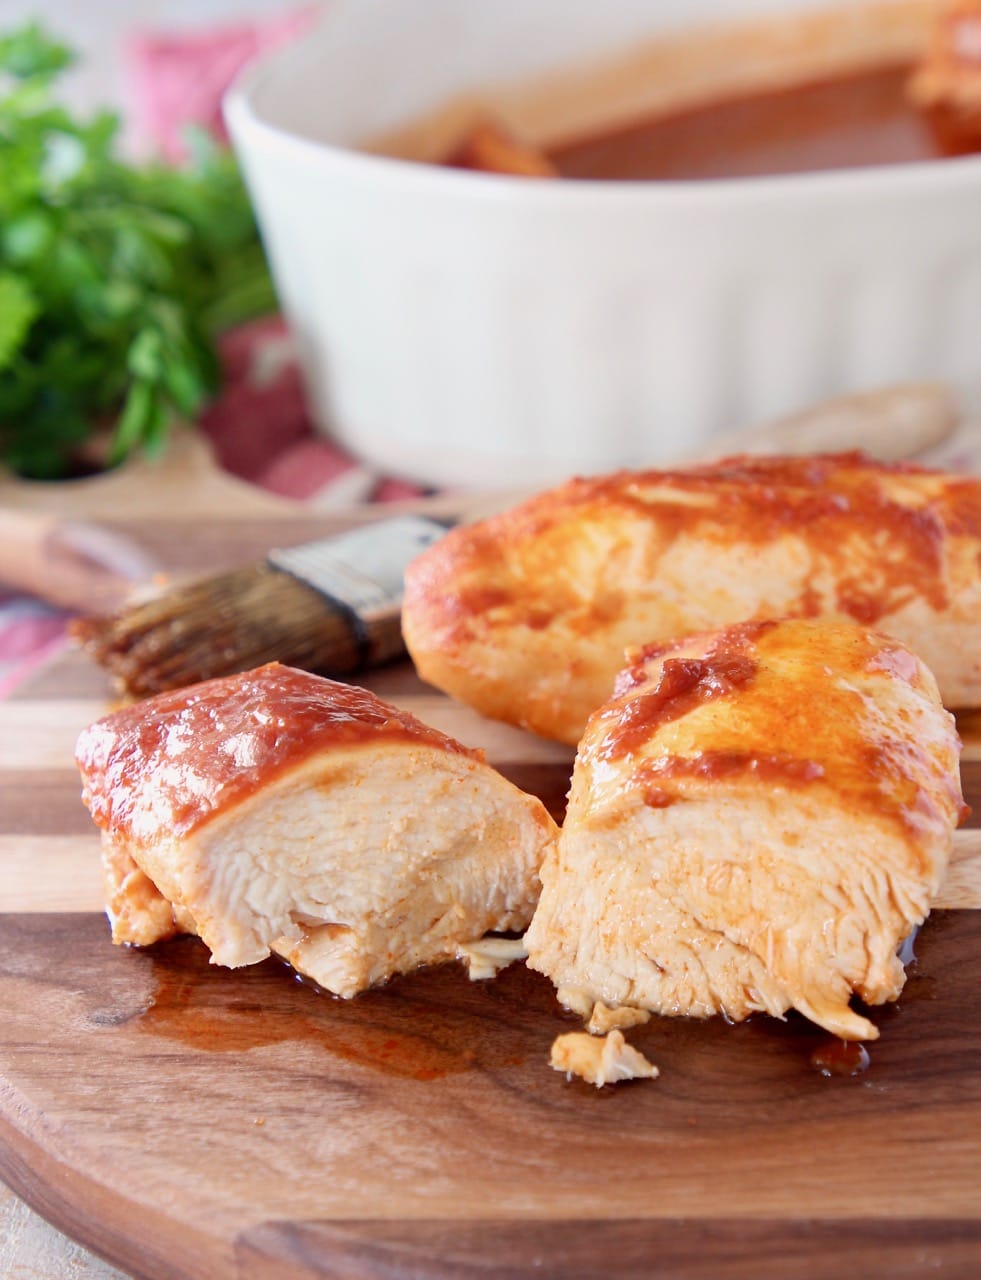 Two pieces of baked chicken on wood cutting board with one piece of chicken sliced in half and pastry brush in the background 